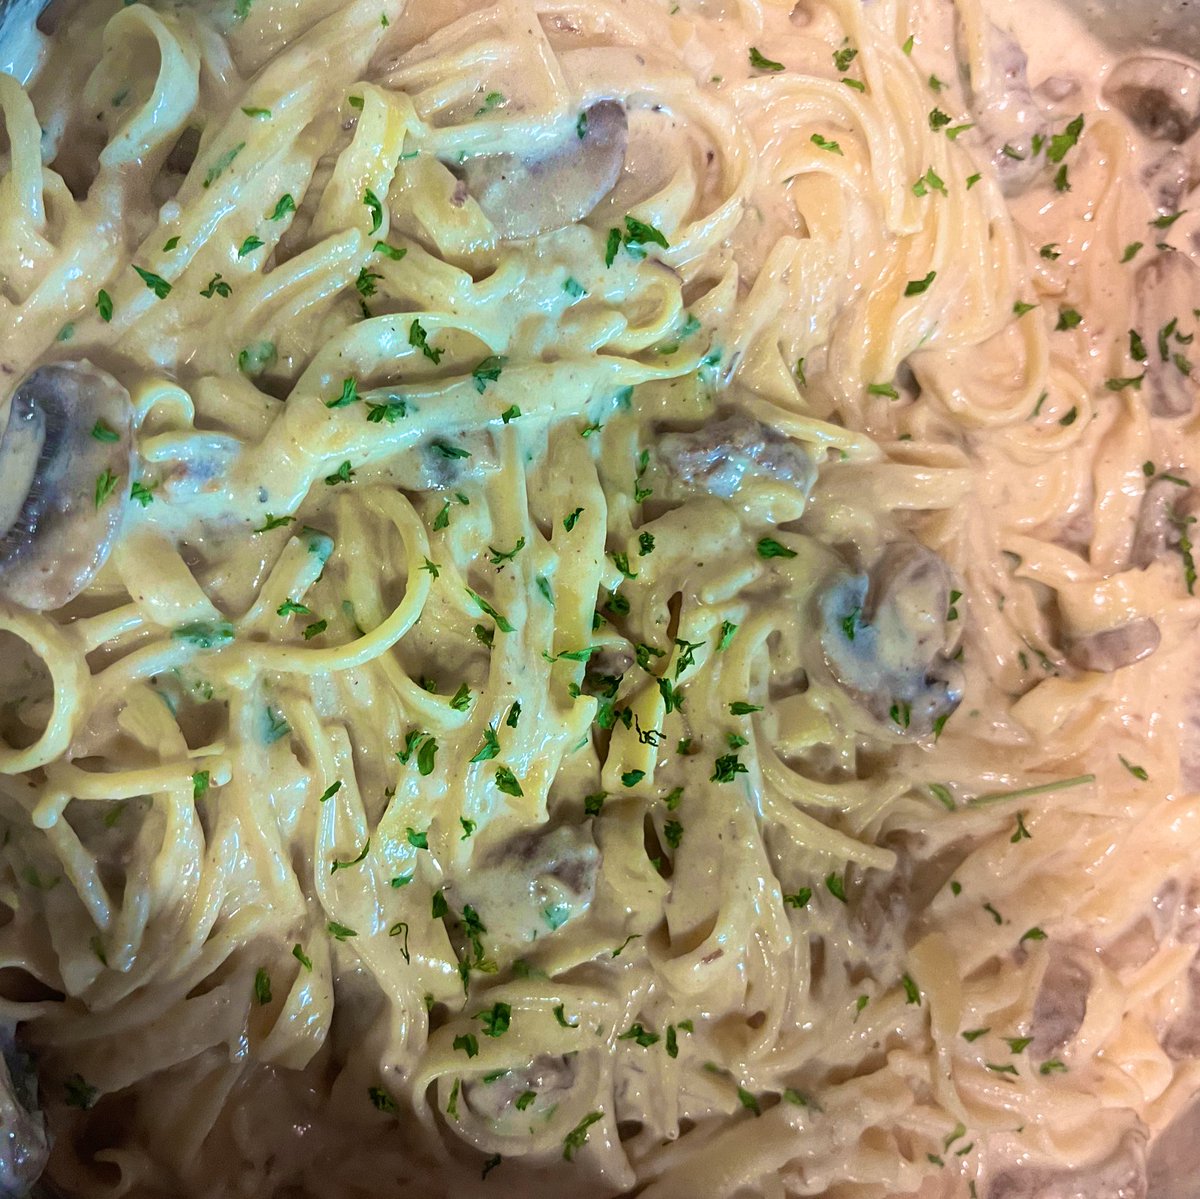 How many are pasta fans? Made some beef pasta with Alfredo sauce and mushrooms. Truly delight, I hope everyone’s having a savory week so far.